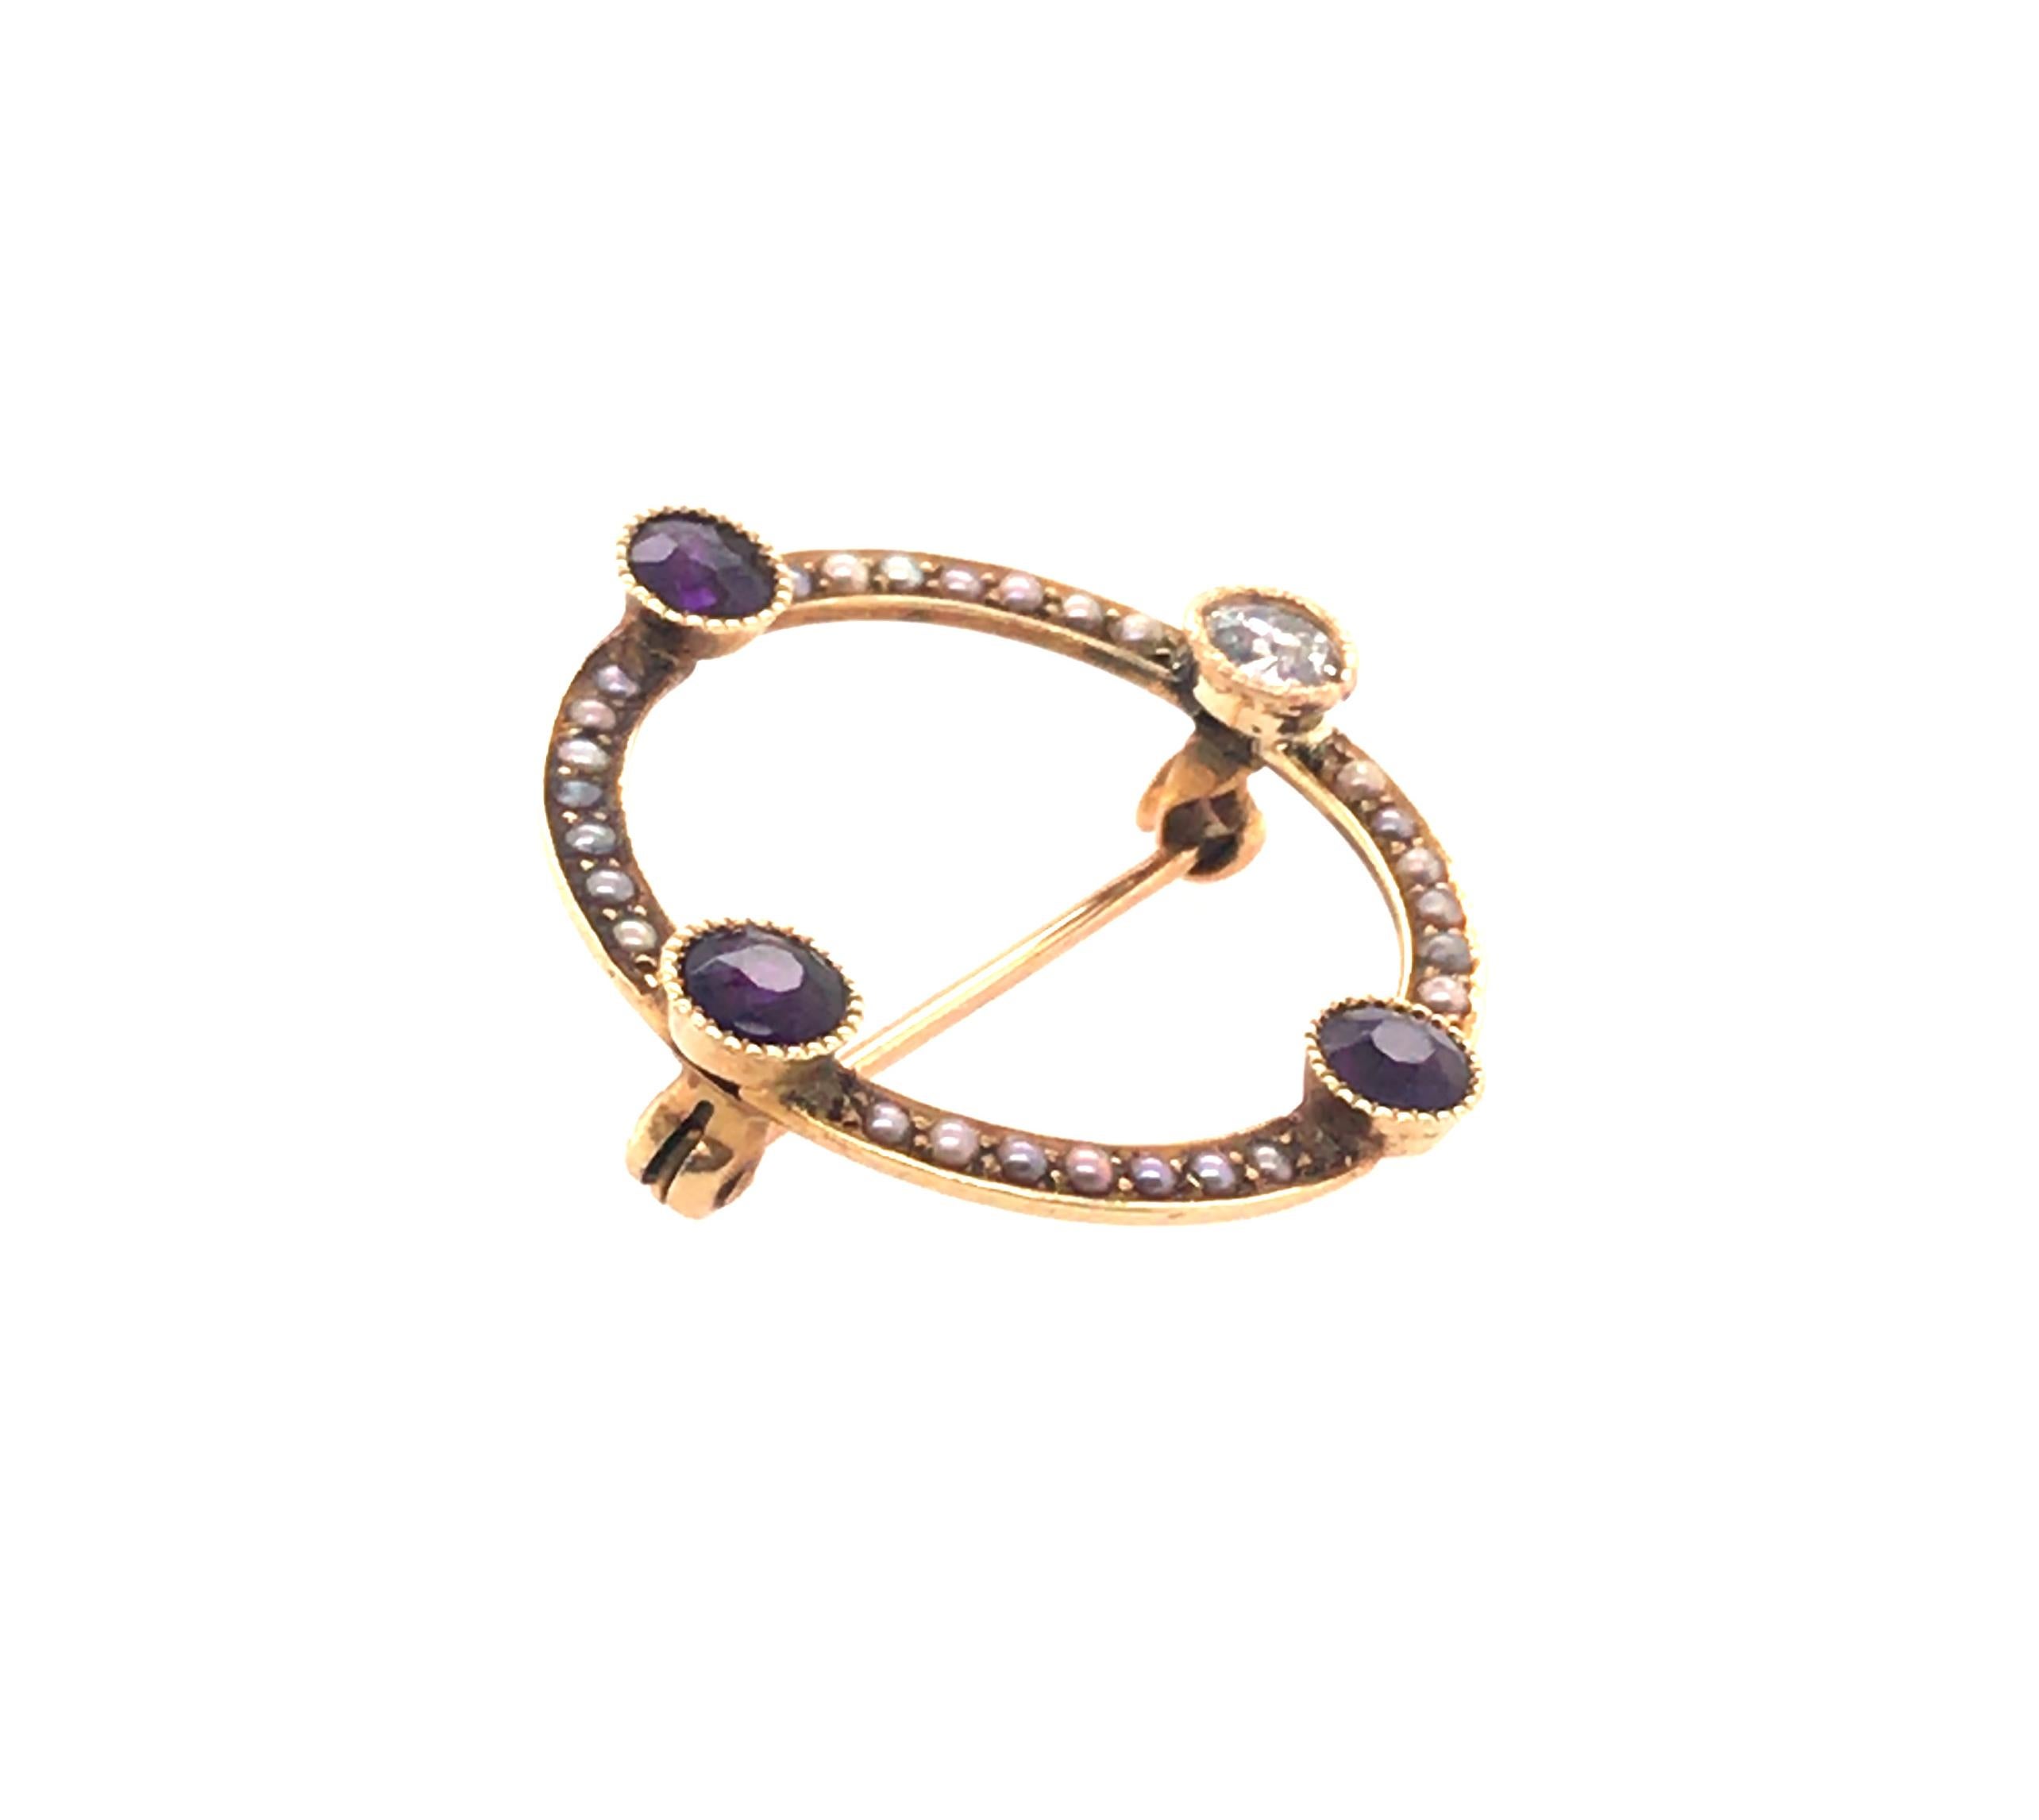 Vintage Antique Victorian 1.03ct Amethyst Diamond Seed Pearl 14K Yellow Gold Pin Brooch



Stunning Christmas Advent Calendar Pin

100% Natural Diamond, Gemstones, and Pearls

1.03 Diamond and Gemstone Weight

Solid 14K Yellow Gold

Gorgeous Patina,